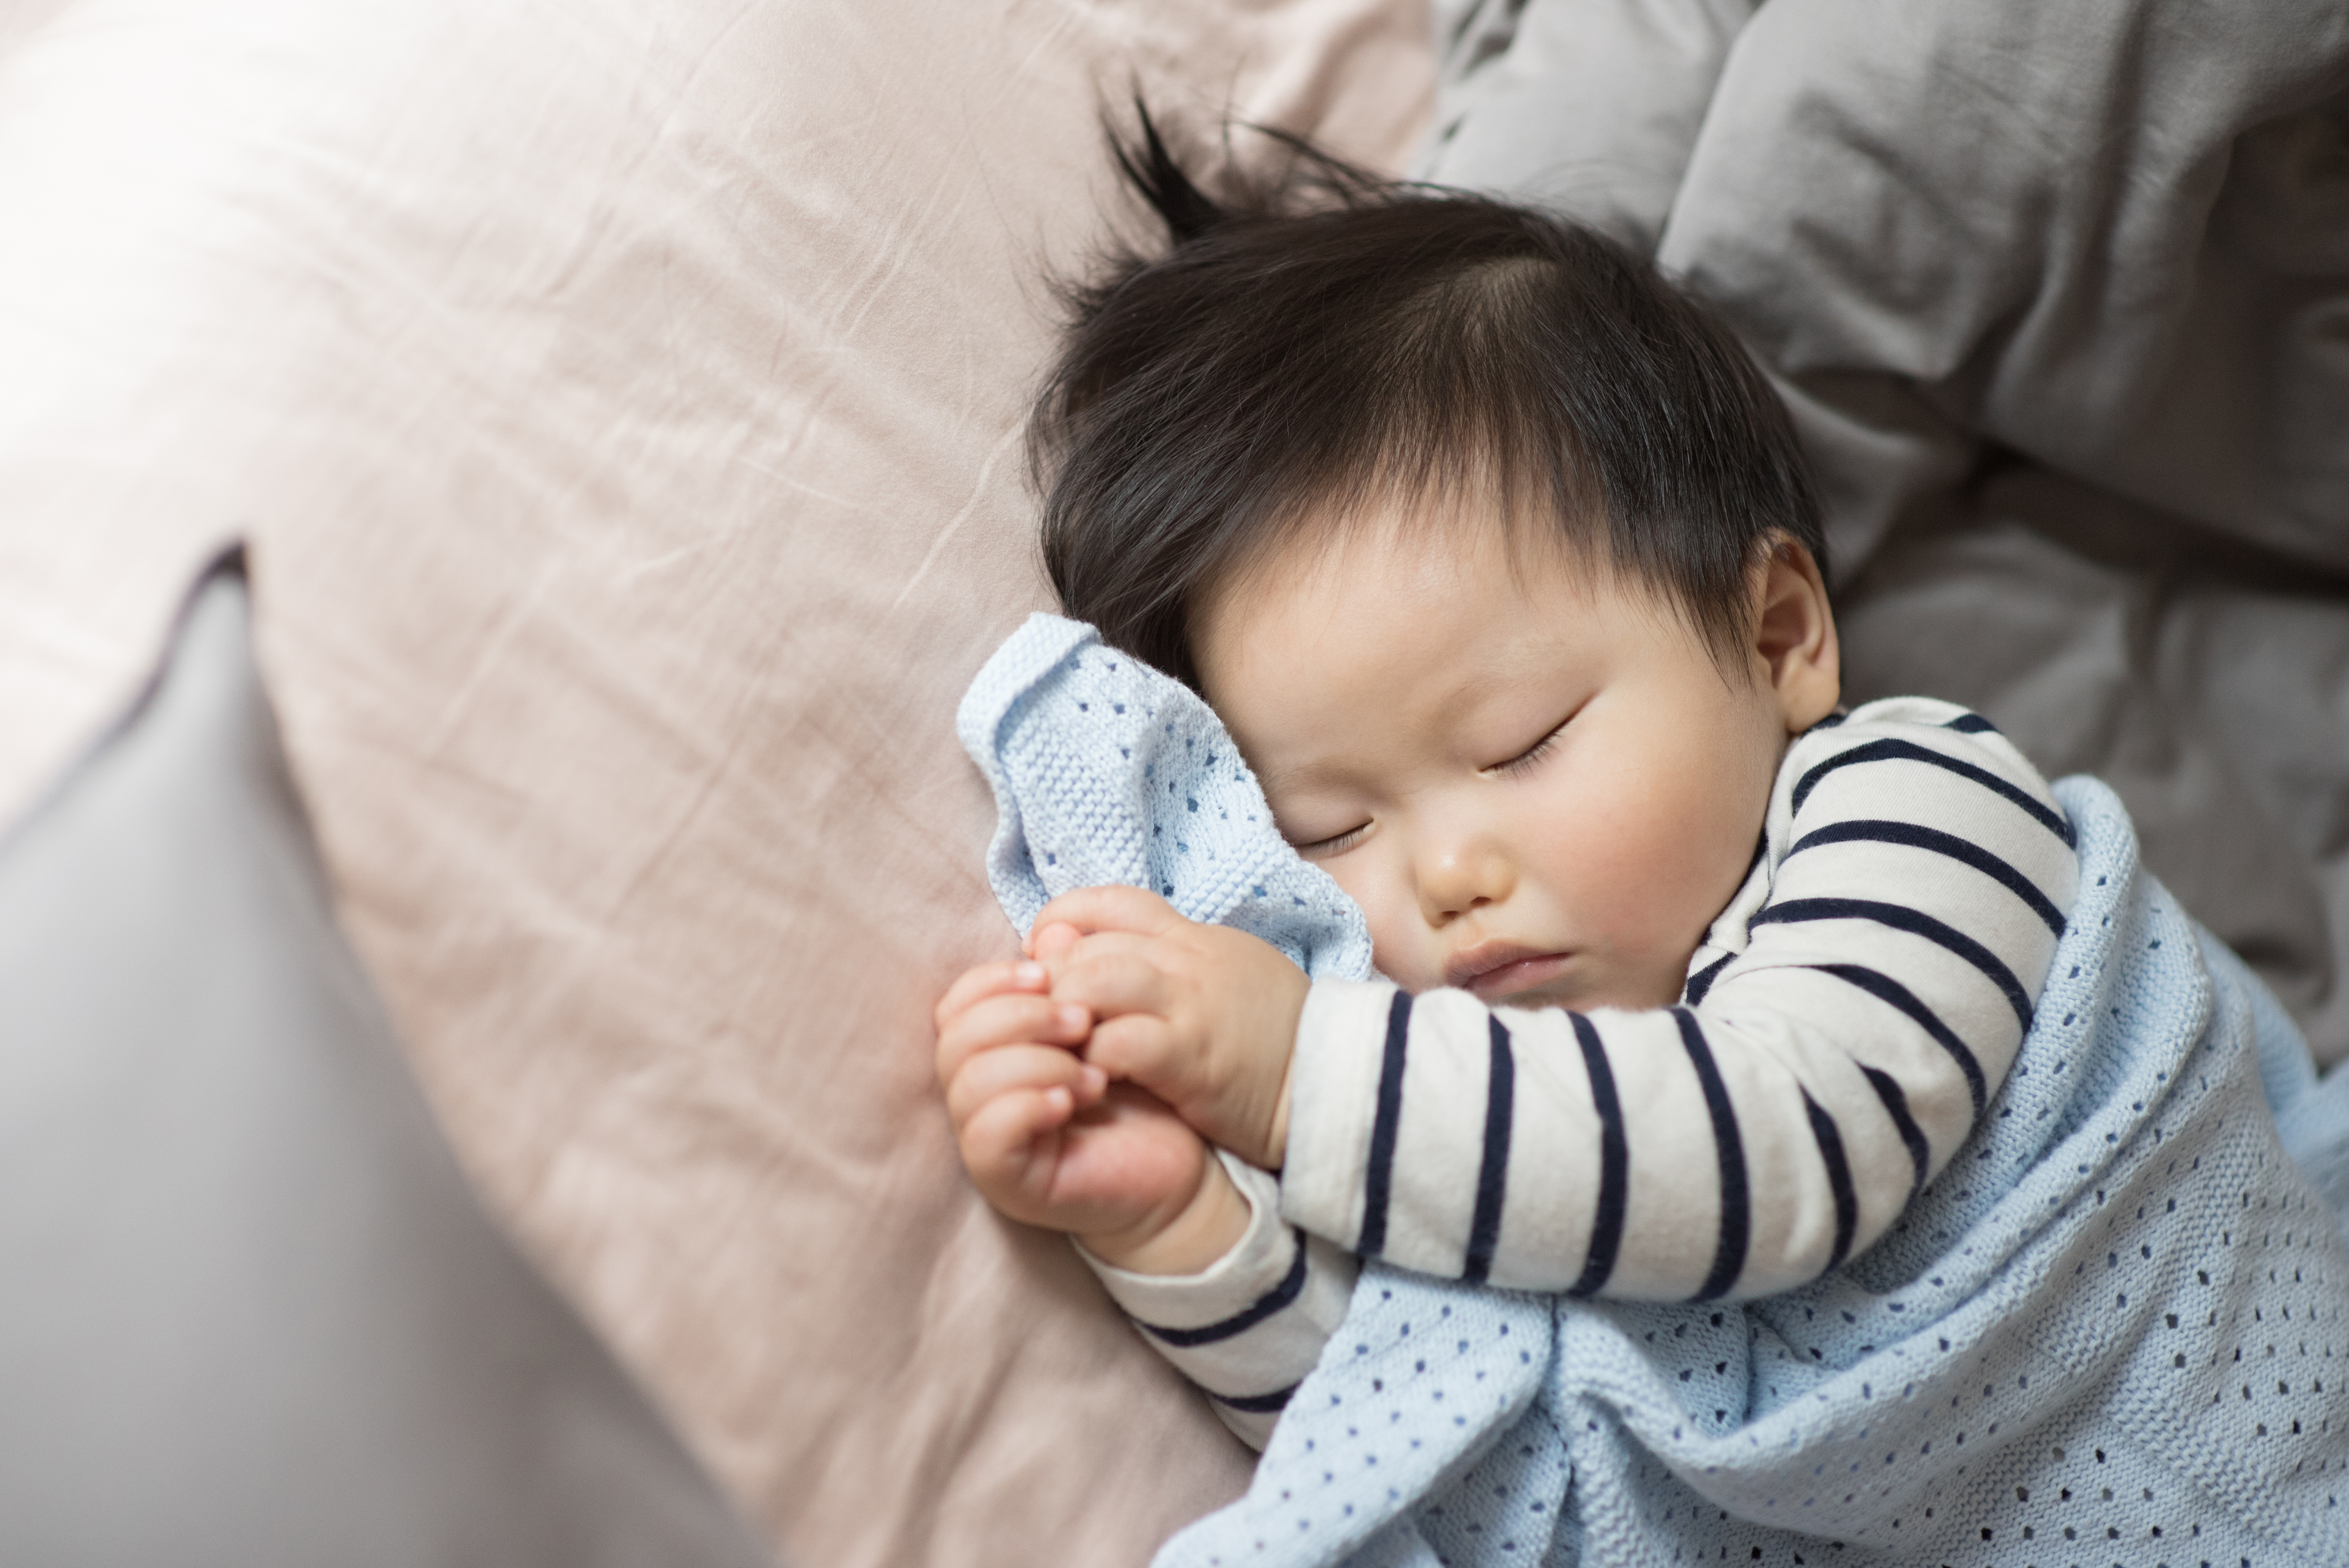 Baby Sleep Schedule: What to Expect Between 4 and 6 Months